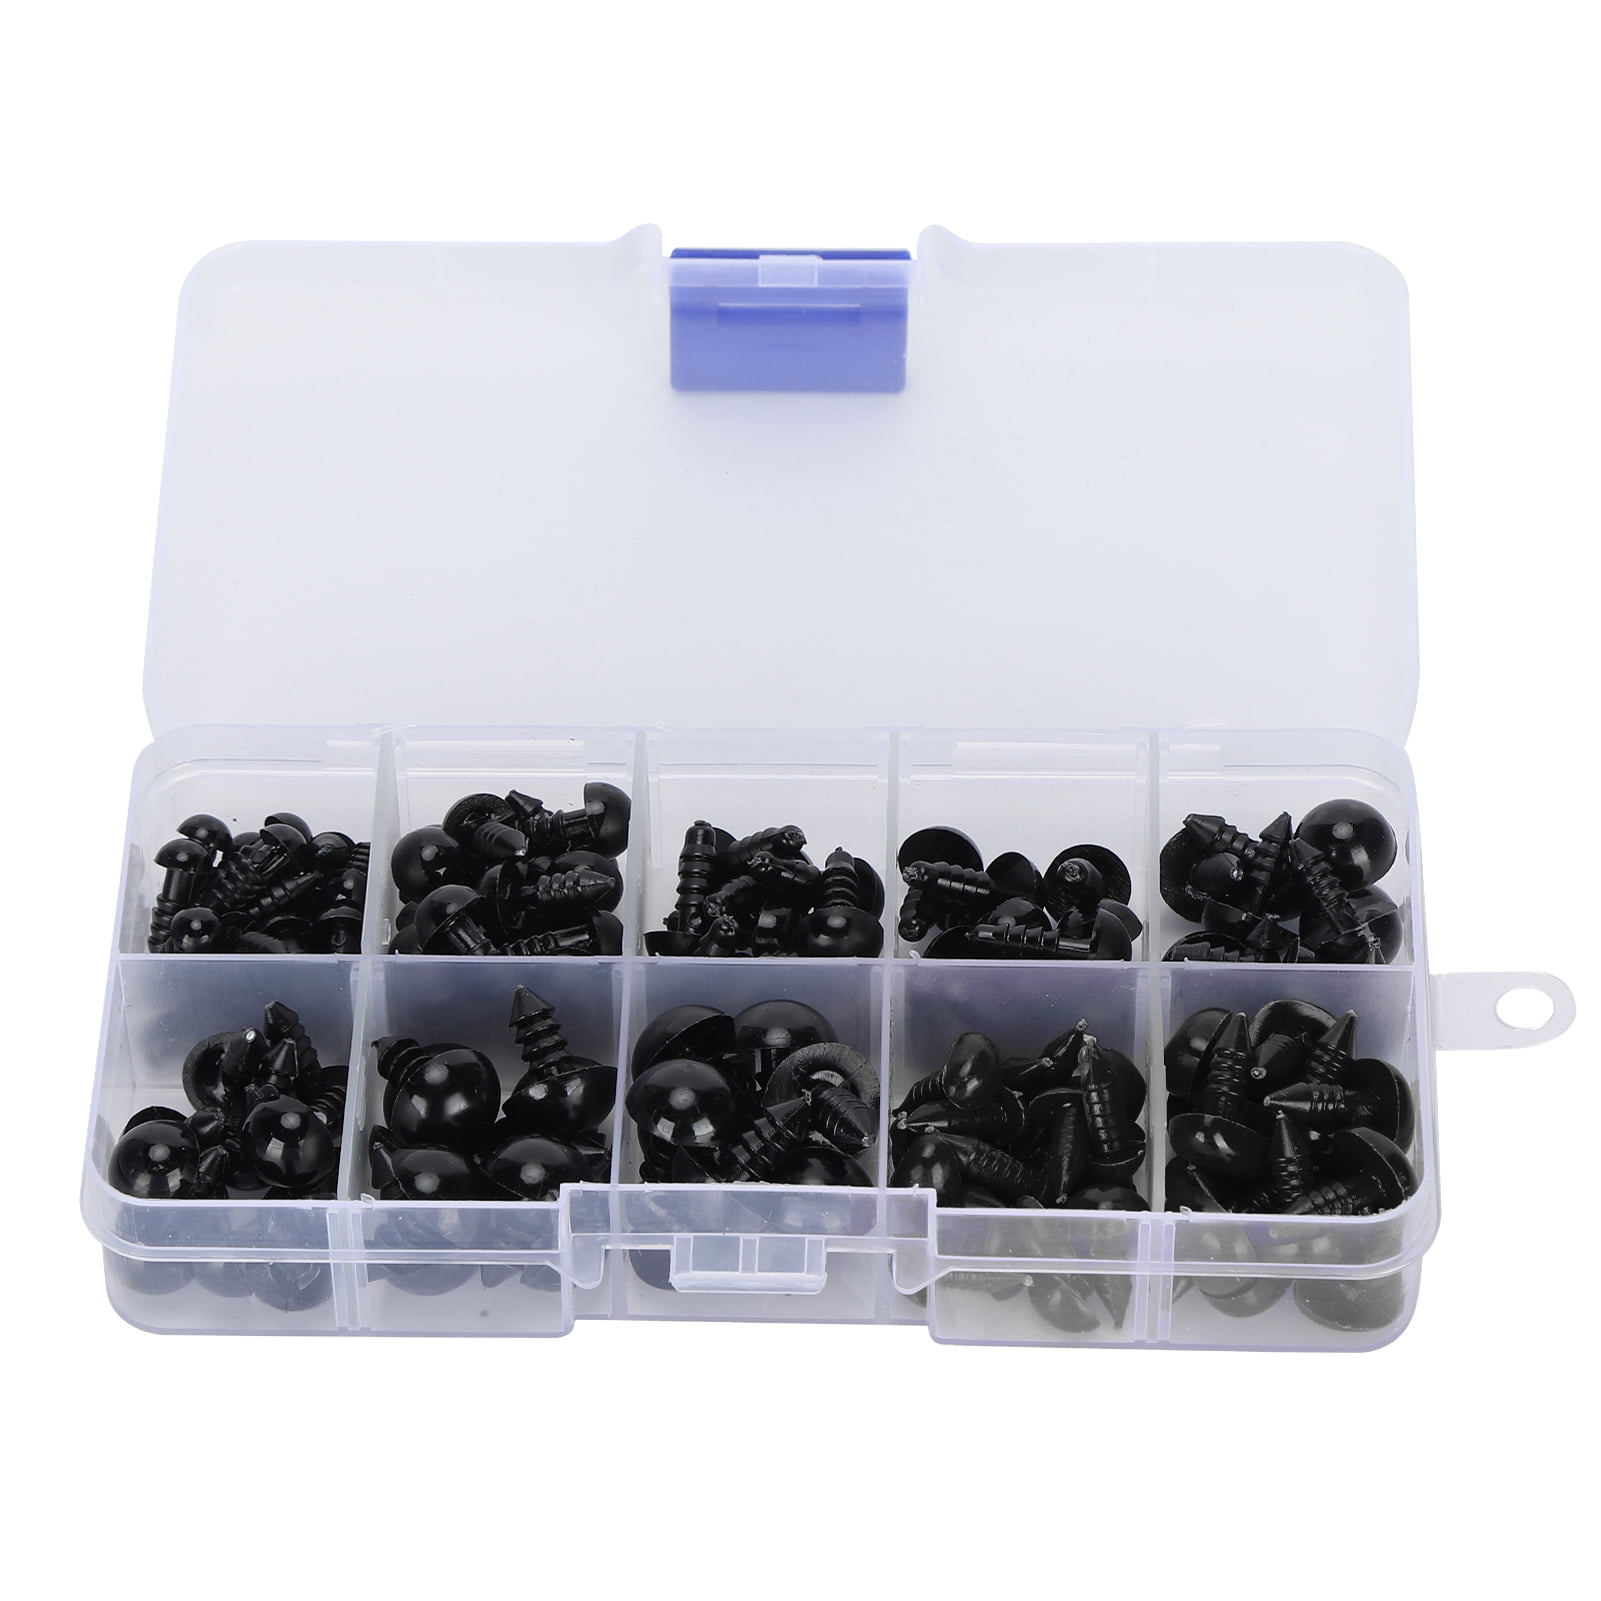 Details about   100Pcs Plastic Safety Toy Screw Eyes Kit for Teddy Bear Doll Animal DIY Craft 